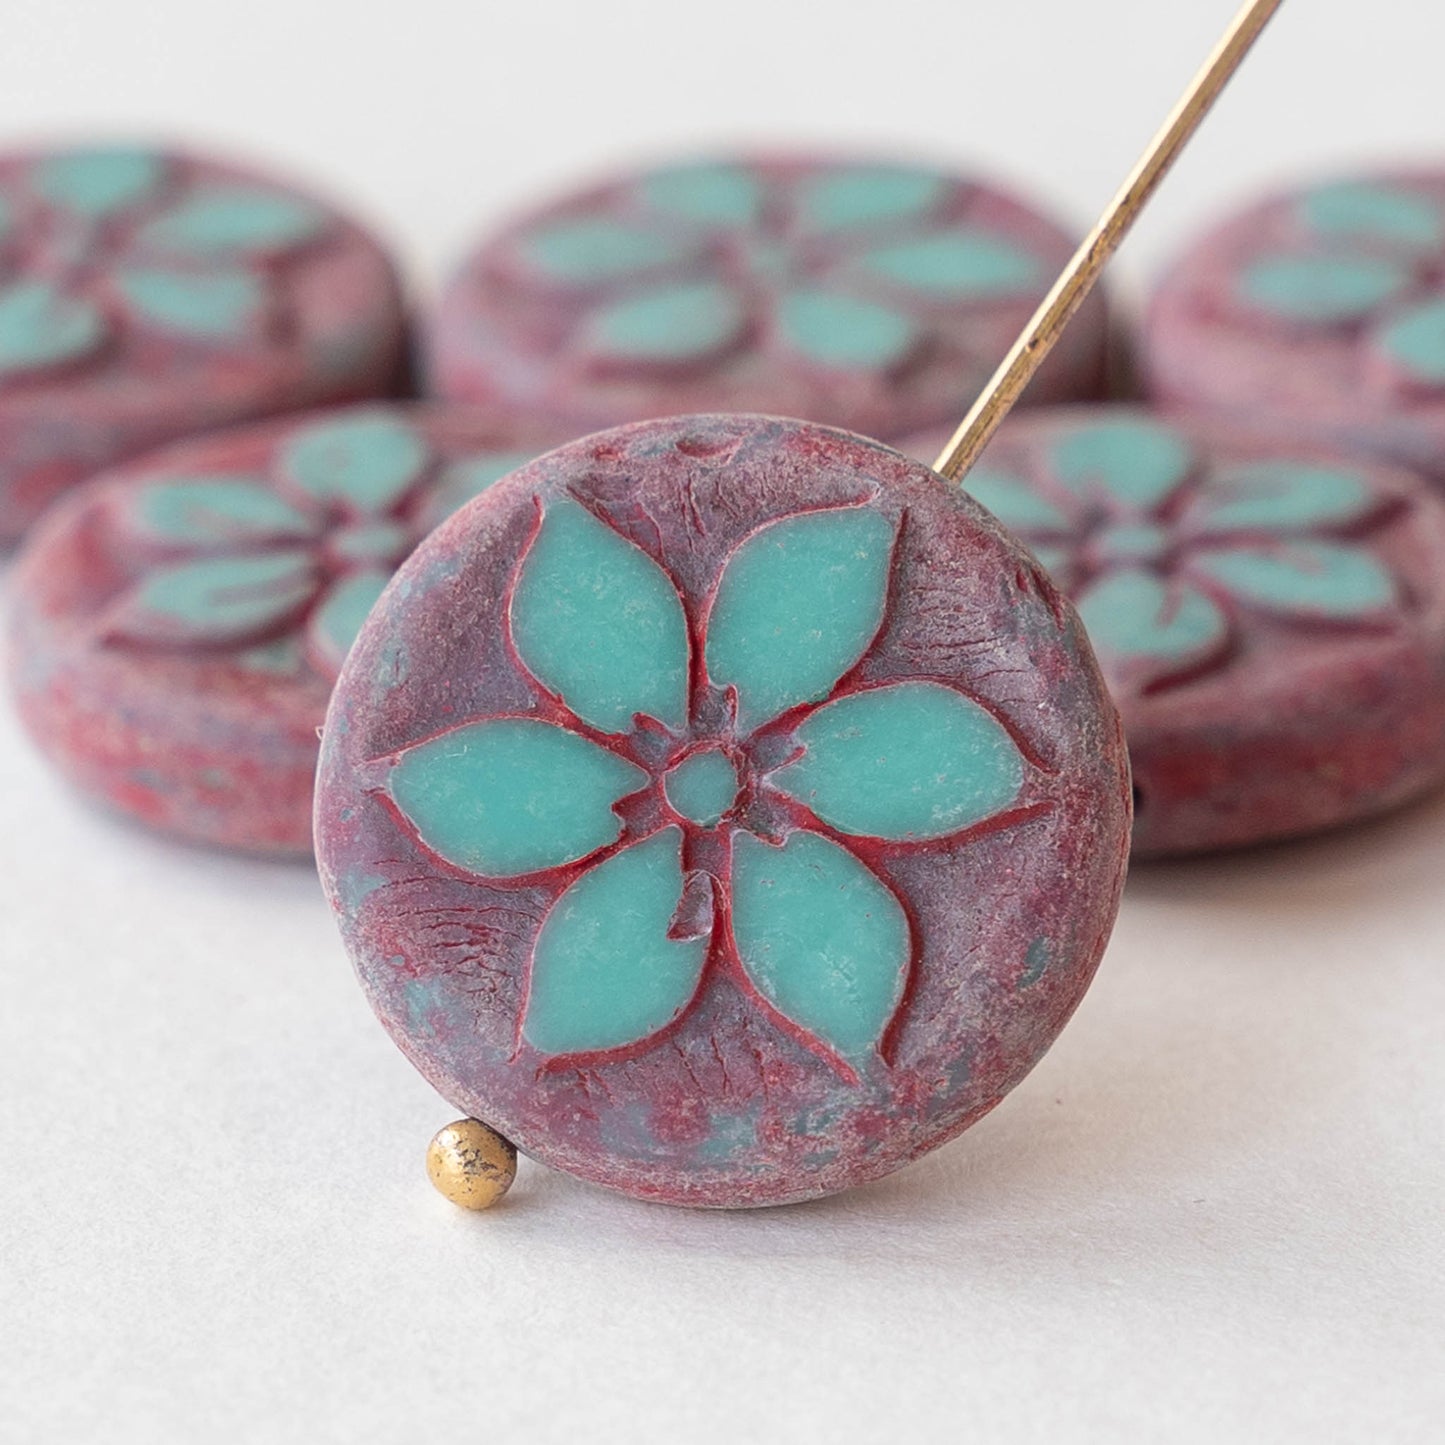 18mm Coin Flower Beads - Opaque Turquoise with Pink - 2 beads